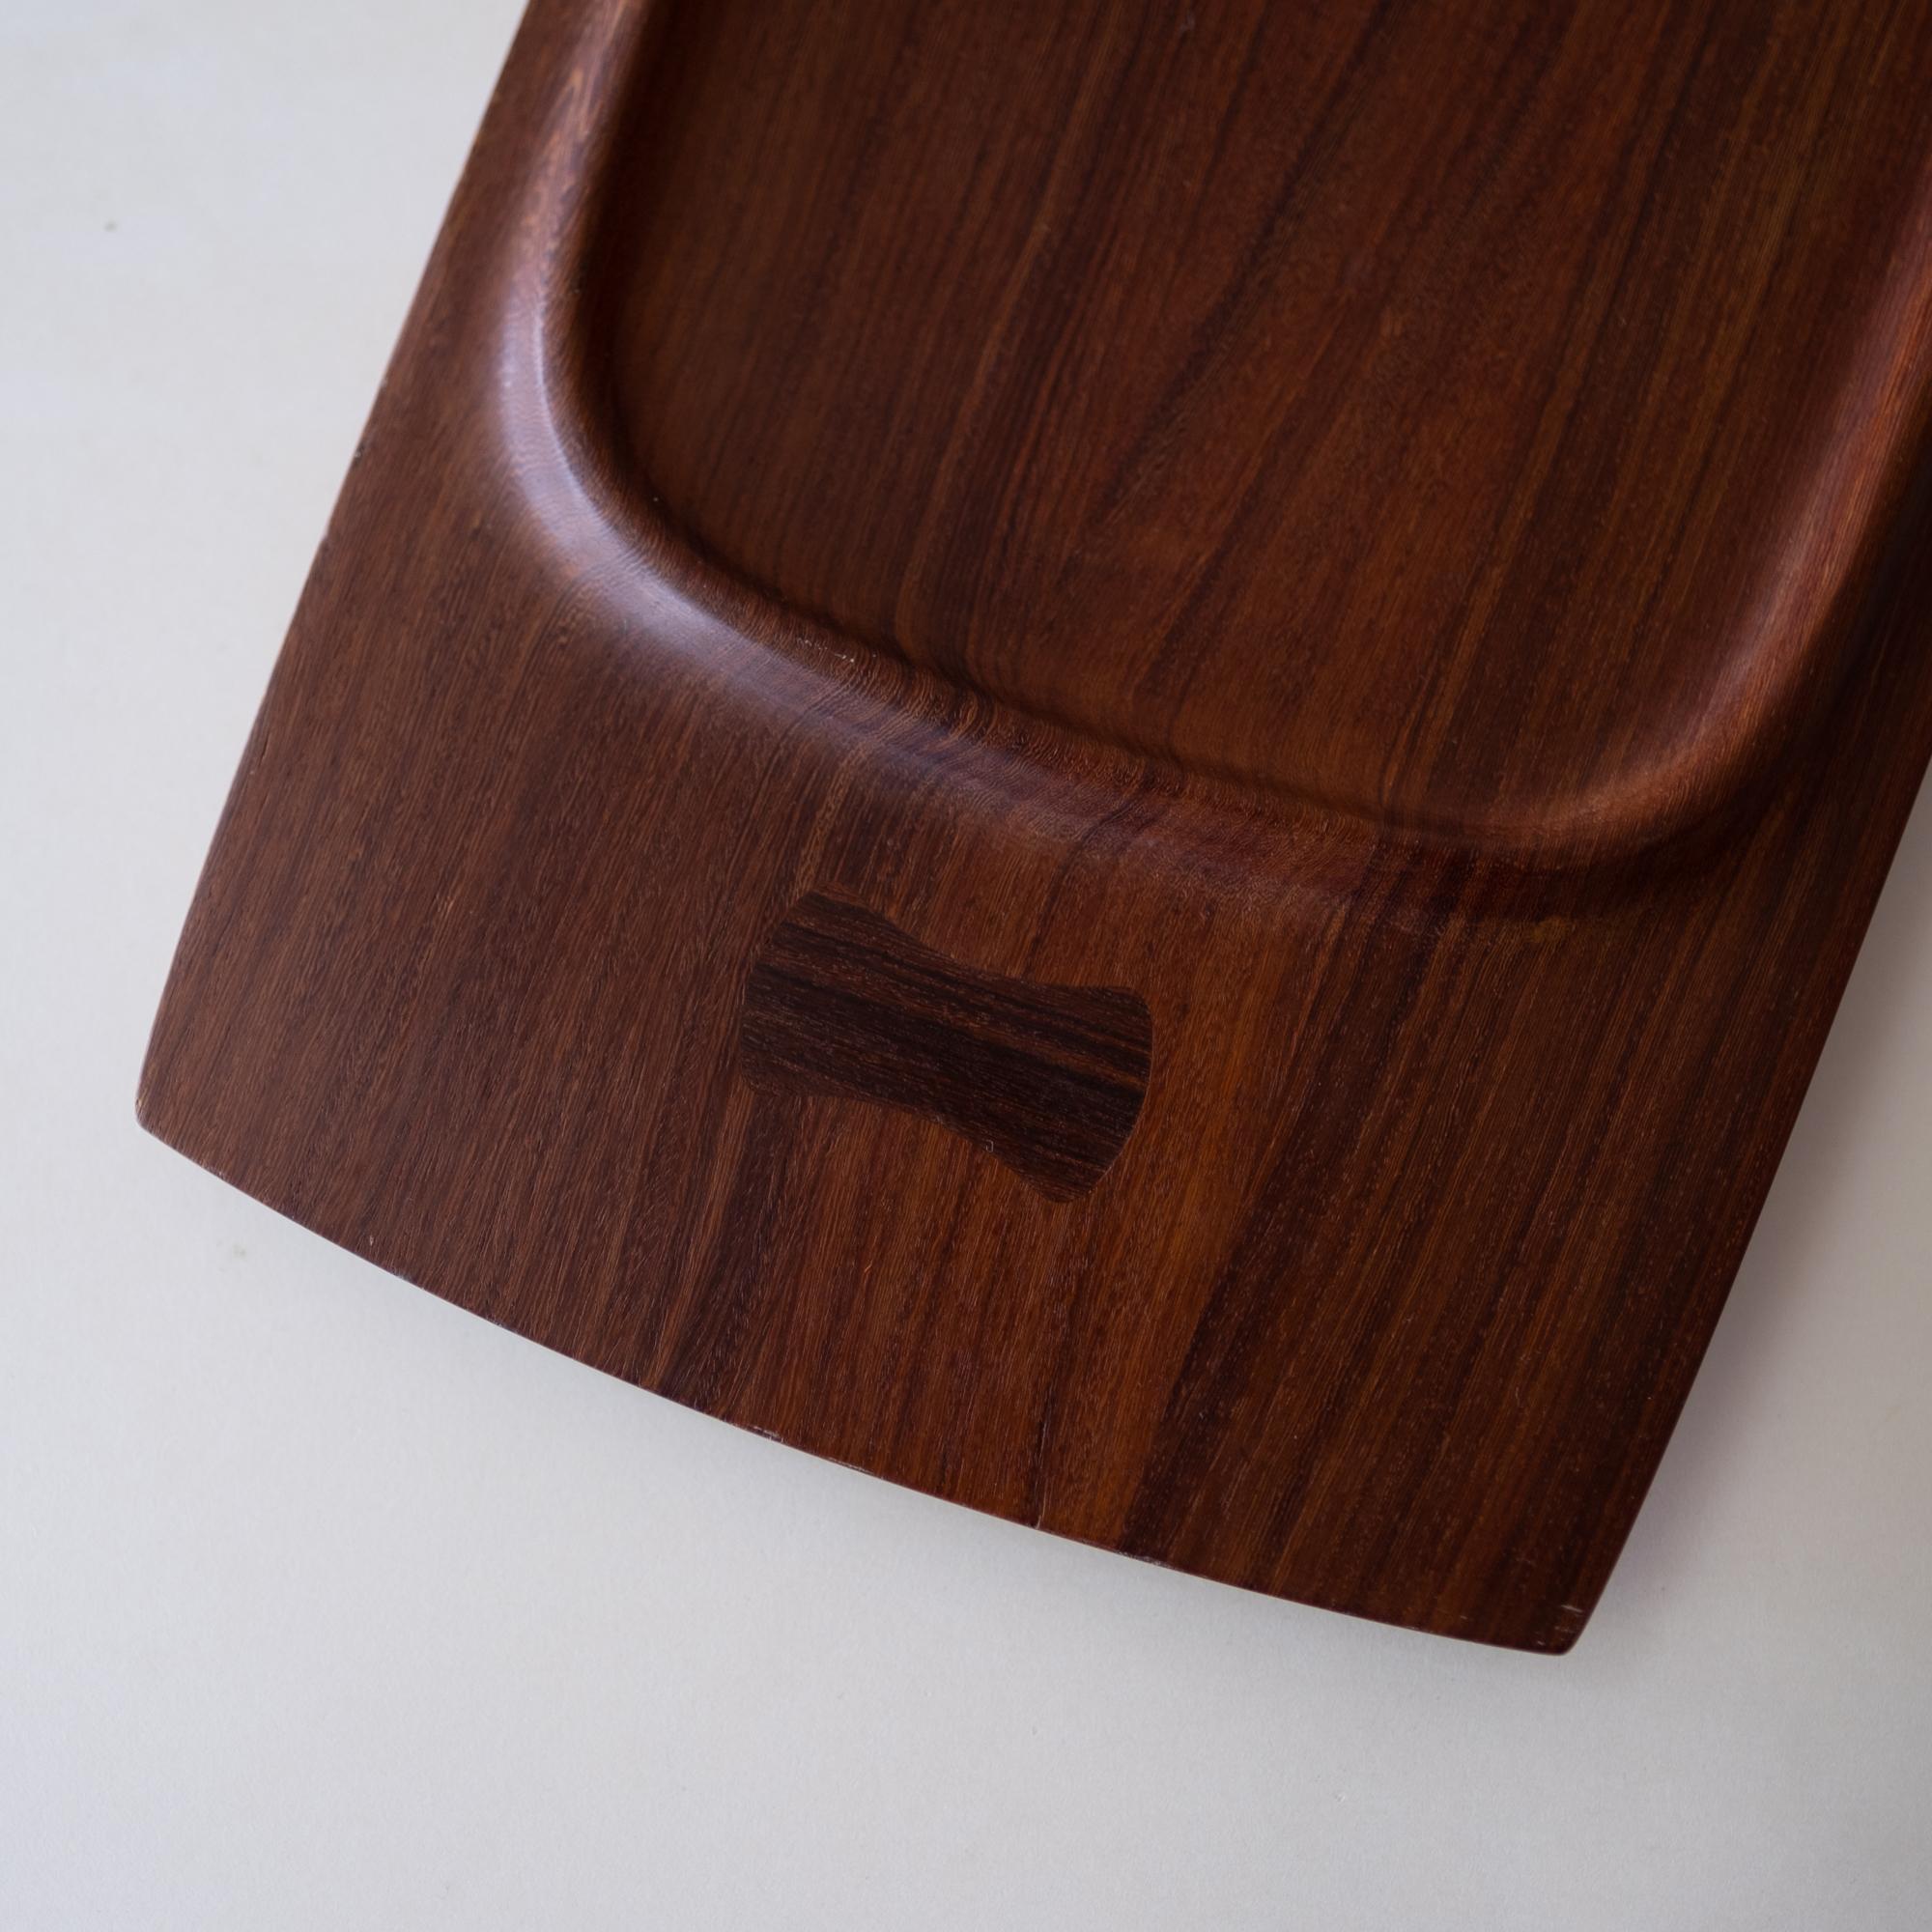 20th Century Dansk Rare Woods Tray by Jens Quistgaard